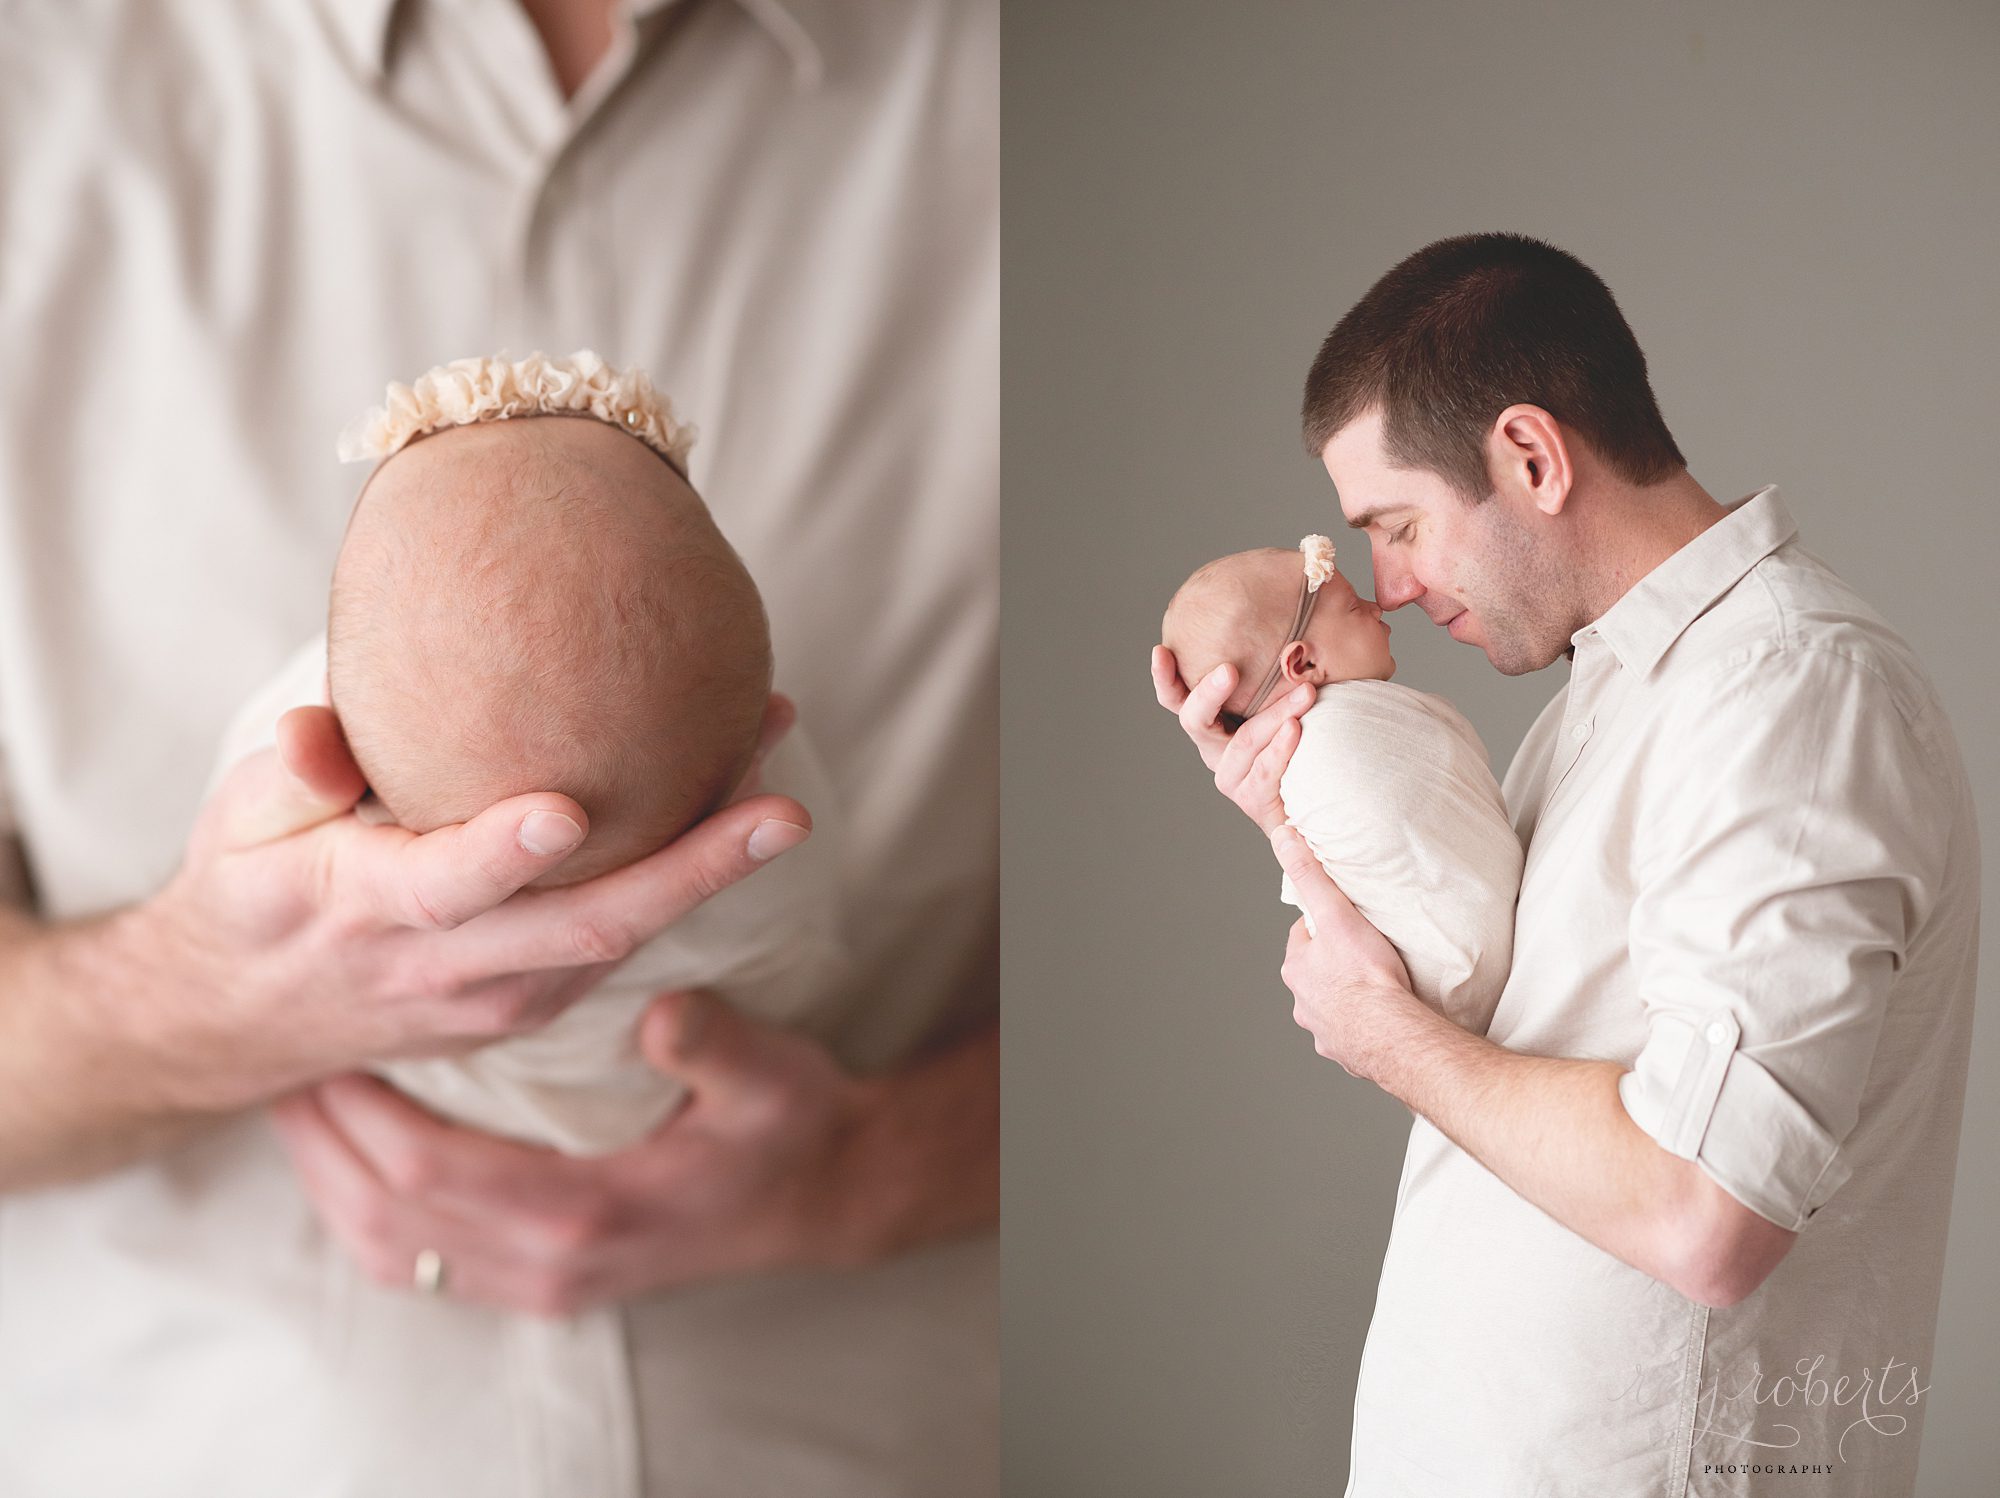 newborn baby girl with father | Reaj Roberts Photography